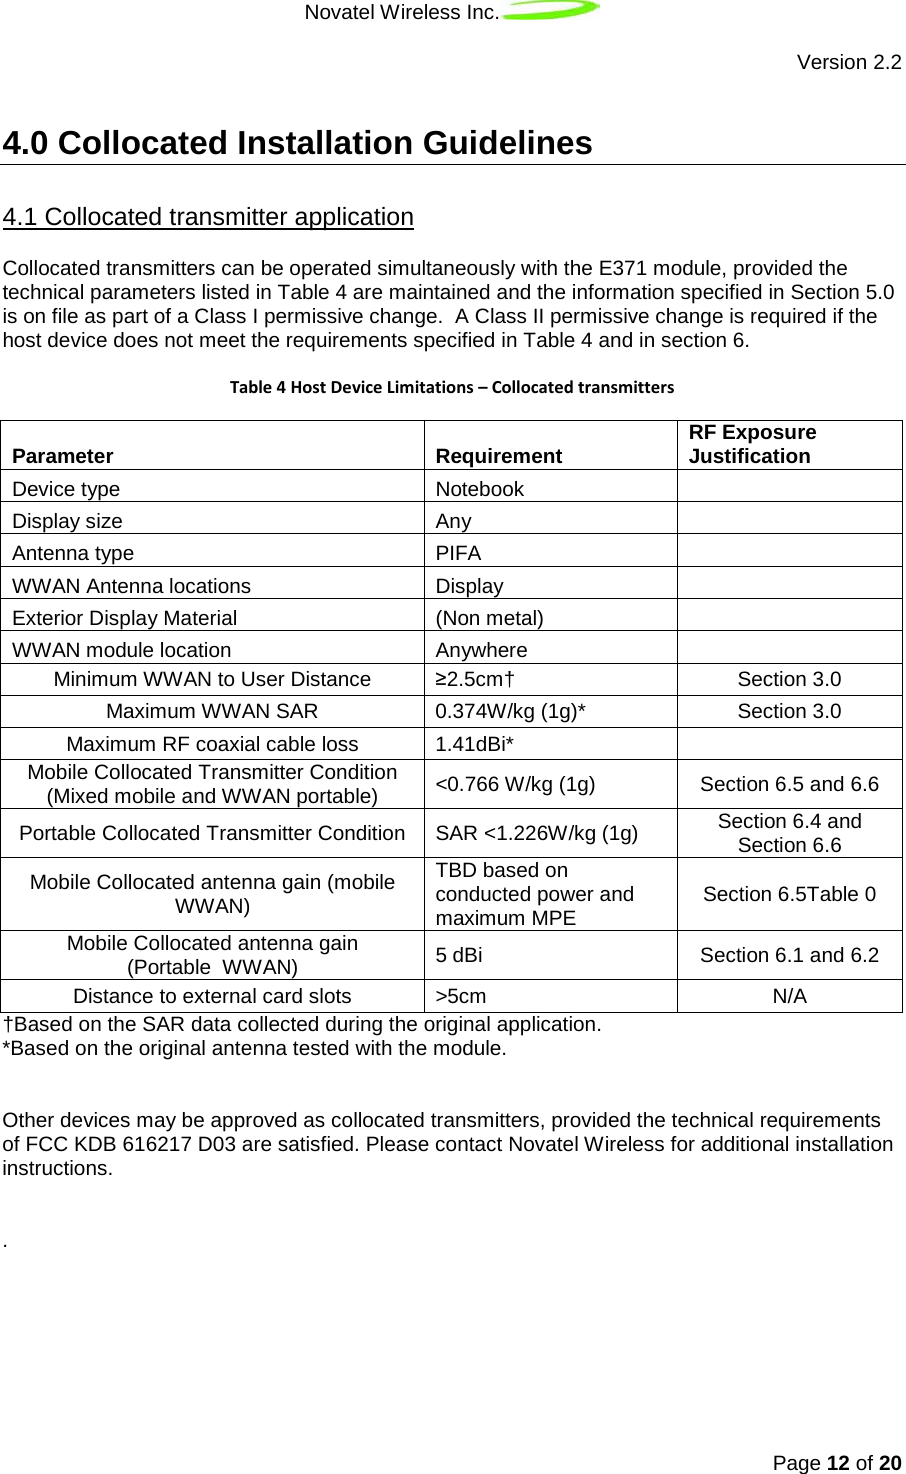 Novatel Wireless Inc.   Version 2.2 Page 12 of 20   4.0 Collocated Installation Guidelines Collocated transmitters can be operated simultaneously with the E371 module, provided the technical parameters listed in Table 4 are maintained and the information specified in Section 5.0 is on file as part of a Class I permissive change.  A Class II permissive change is required if the host device does not meet the requirements specified in Table 4 and in section 6. 4.1 Collocated transmitter application  Table 4 Host Device Limitations – Collocated transmitters Parameter Requirement RF Exposure Justification Device type Notebook  Display size Any  Antenna type PIFA  WWAN Antenna locations Display  Exterior Display Material (Non metal)   WWAN module location Anywhere  Minimum WWAN to User Distance ≥2.5cm† Section 3.0 Maximum WWAN SAR 0.374W/kg (1g)* Section 3.0 Maximum RF coaxial cable loss 1.41dBi*  Mobile Collocated Transmitter Condition (Mixed mobile and WWAN portable) &lt;0.766 W/kg (1g) Section 6.5 and 6.6 Portable Collocated Transmitter Condition SAR &lt;1.226W/kg (1g) Section 6.4 and Section 6.6 Mobile Collocated antenna gain (mobile WWAN) TBD based on conducted power and maximum MPE Section 6.5Table 0 Mobile Collocated antenna gain  (Portable  WWAN) 5 dBi   Section 6.1 and 6.2 Distance to external card slots &gt;5cm N/A †Based on the SAR data collected during the original application. *Based on the original antenna tested with the module.    Other devices may be approved as collocated transmitters, provided the technical requirements of FCC KDB 616217 D03 are satisfied. Please contact Novatel Wireless for additional installation instructions.   .